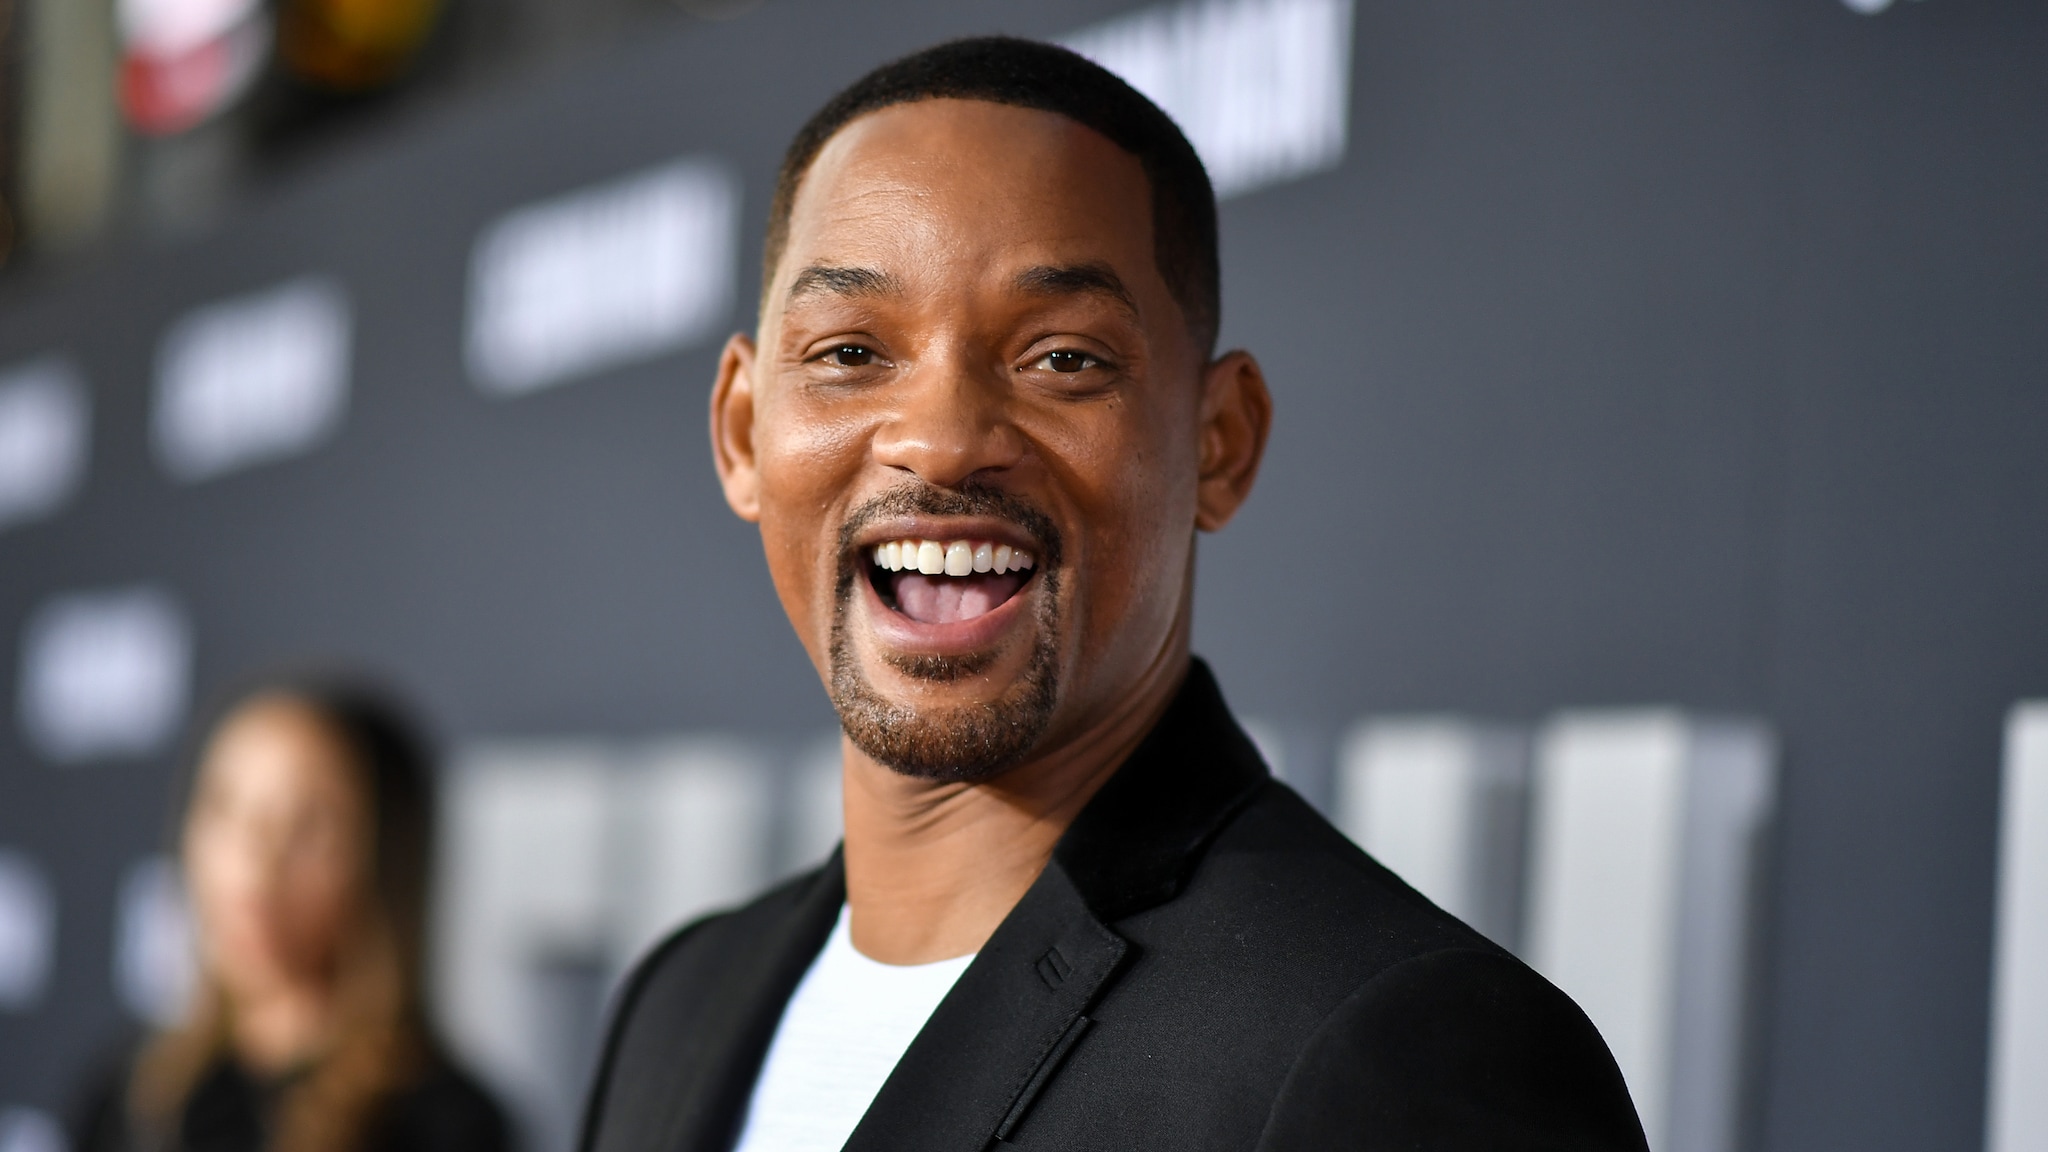 biography will smith